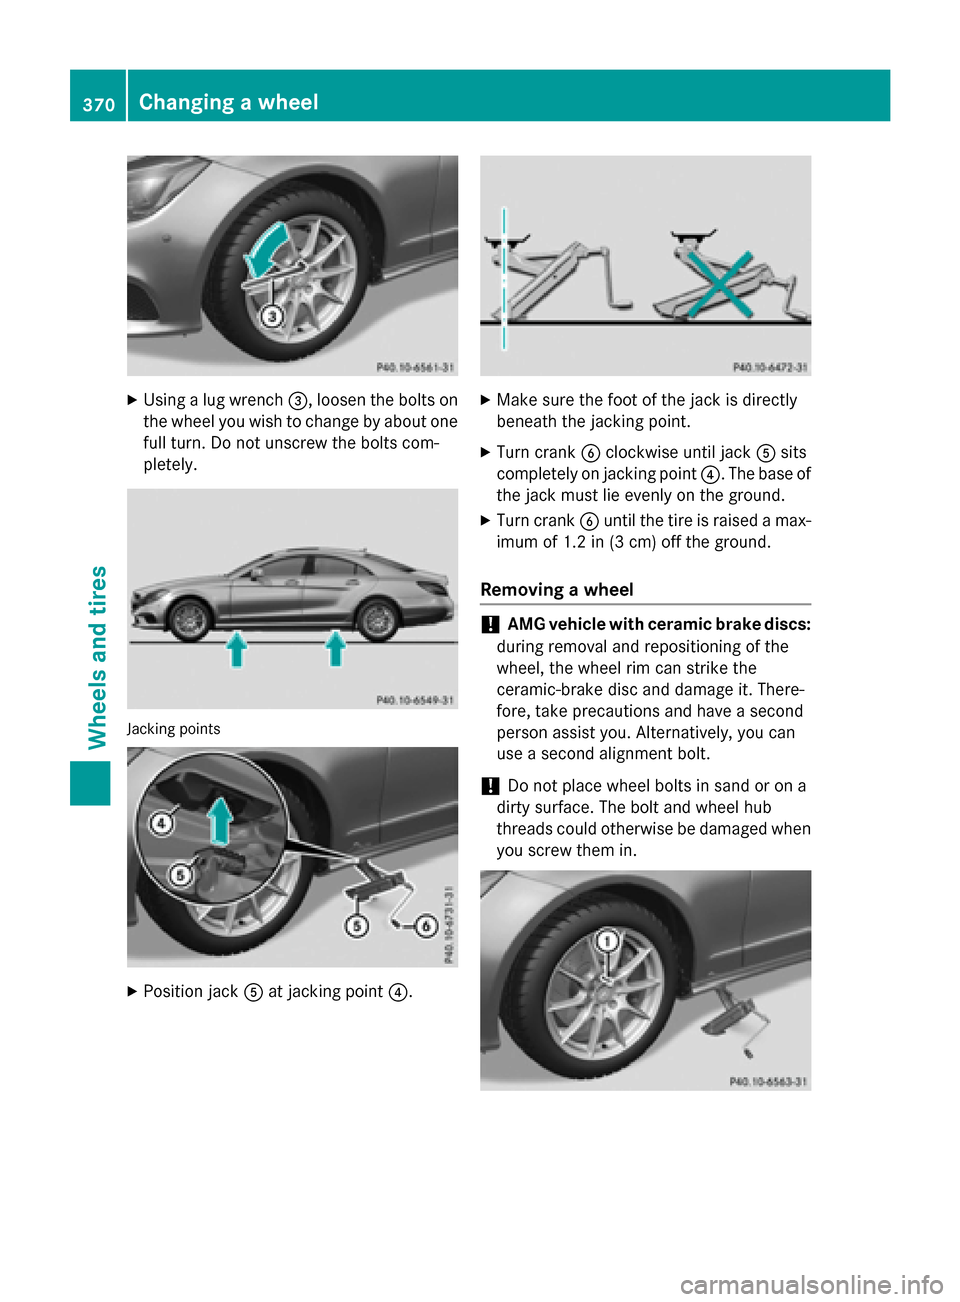 MERCEDES-BENZ CLS-Class 2015 W218 Owners Manual X
Using a lug wrench =, loosen the bolts on
the wheel you wish to change by about one full turn. Do not unscrew the bolts com-
pletely. Jacking points
X
Position jack Aat jacking point ?. X
Make sure 